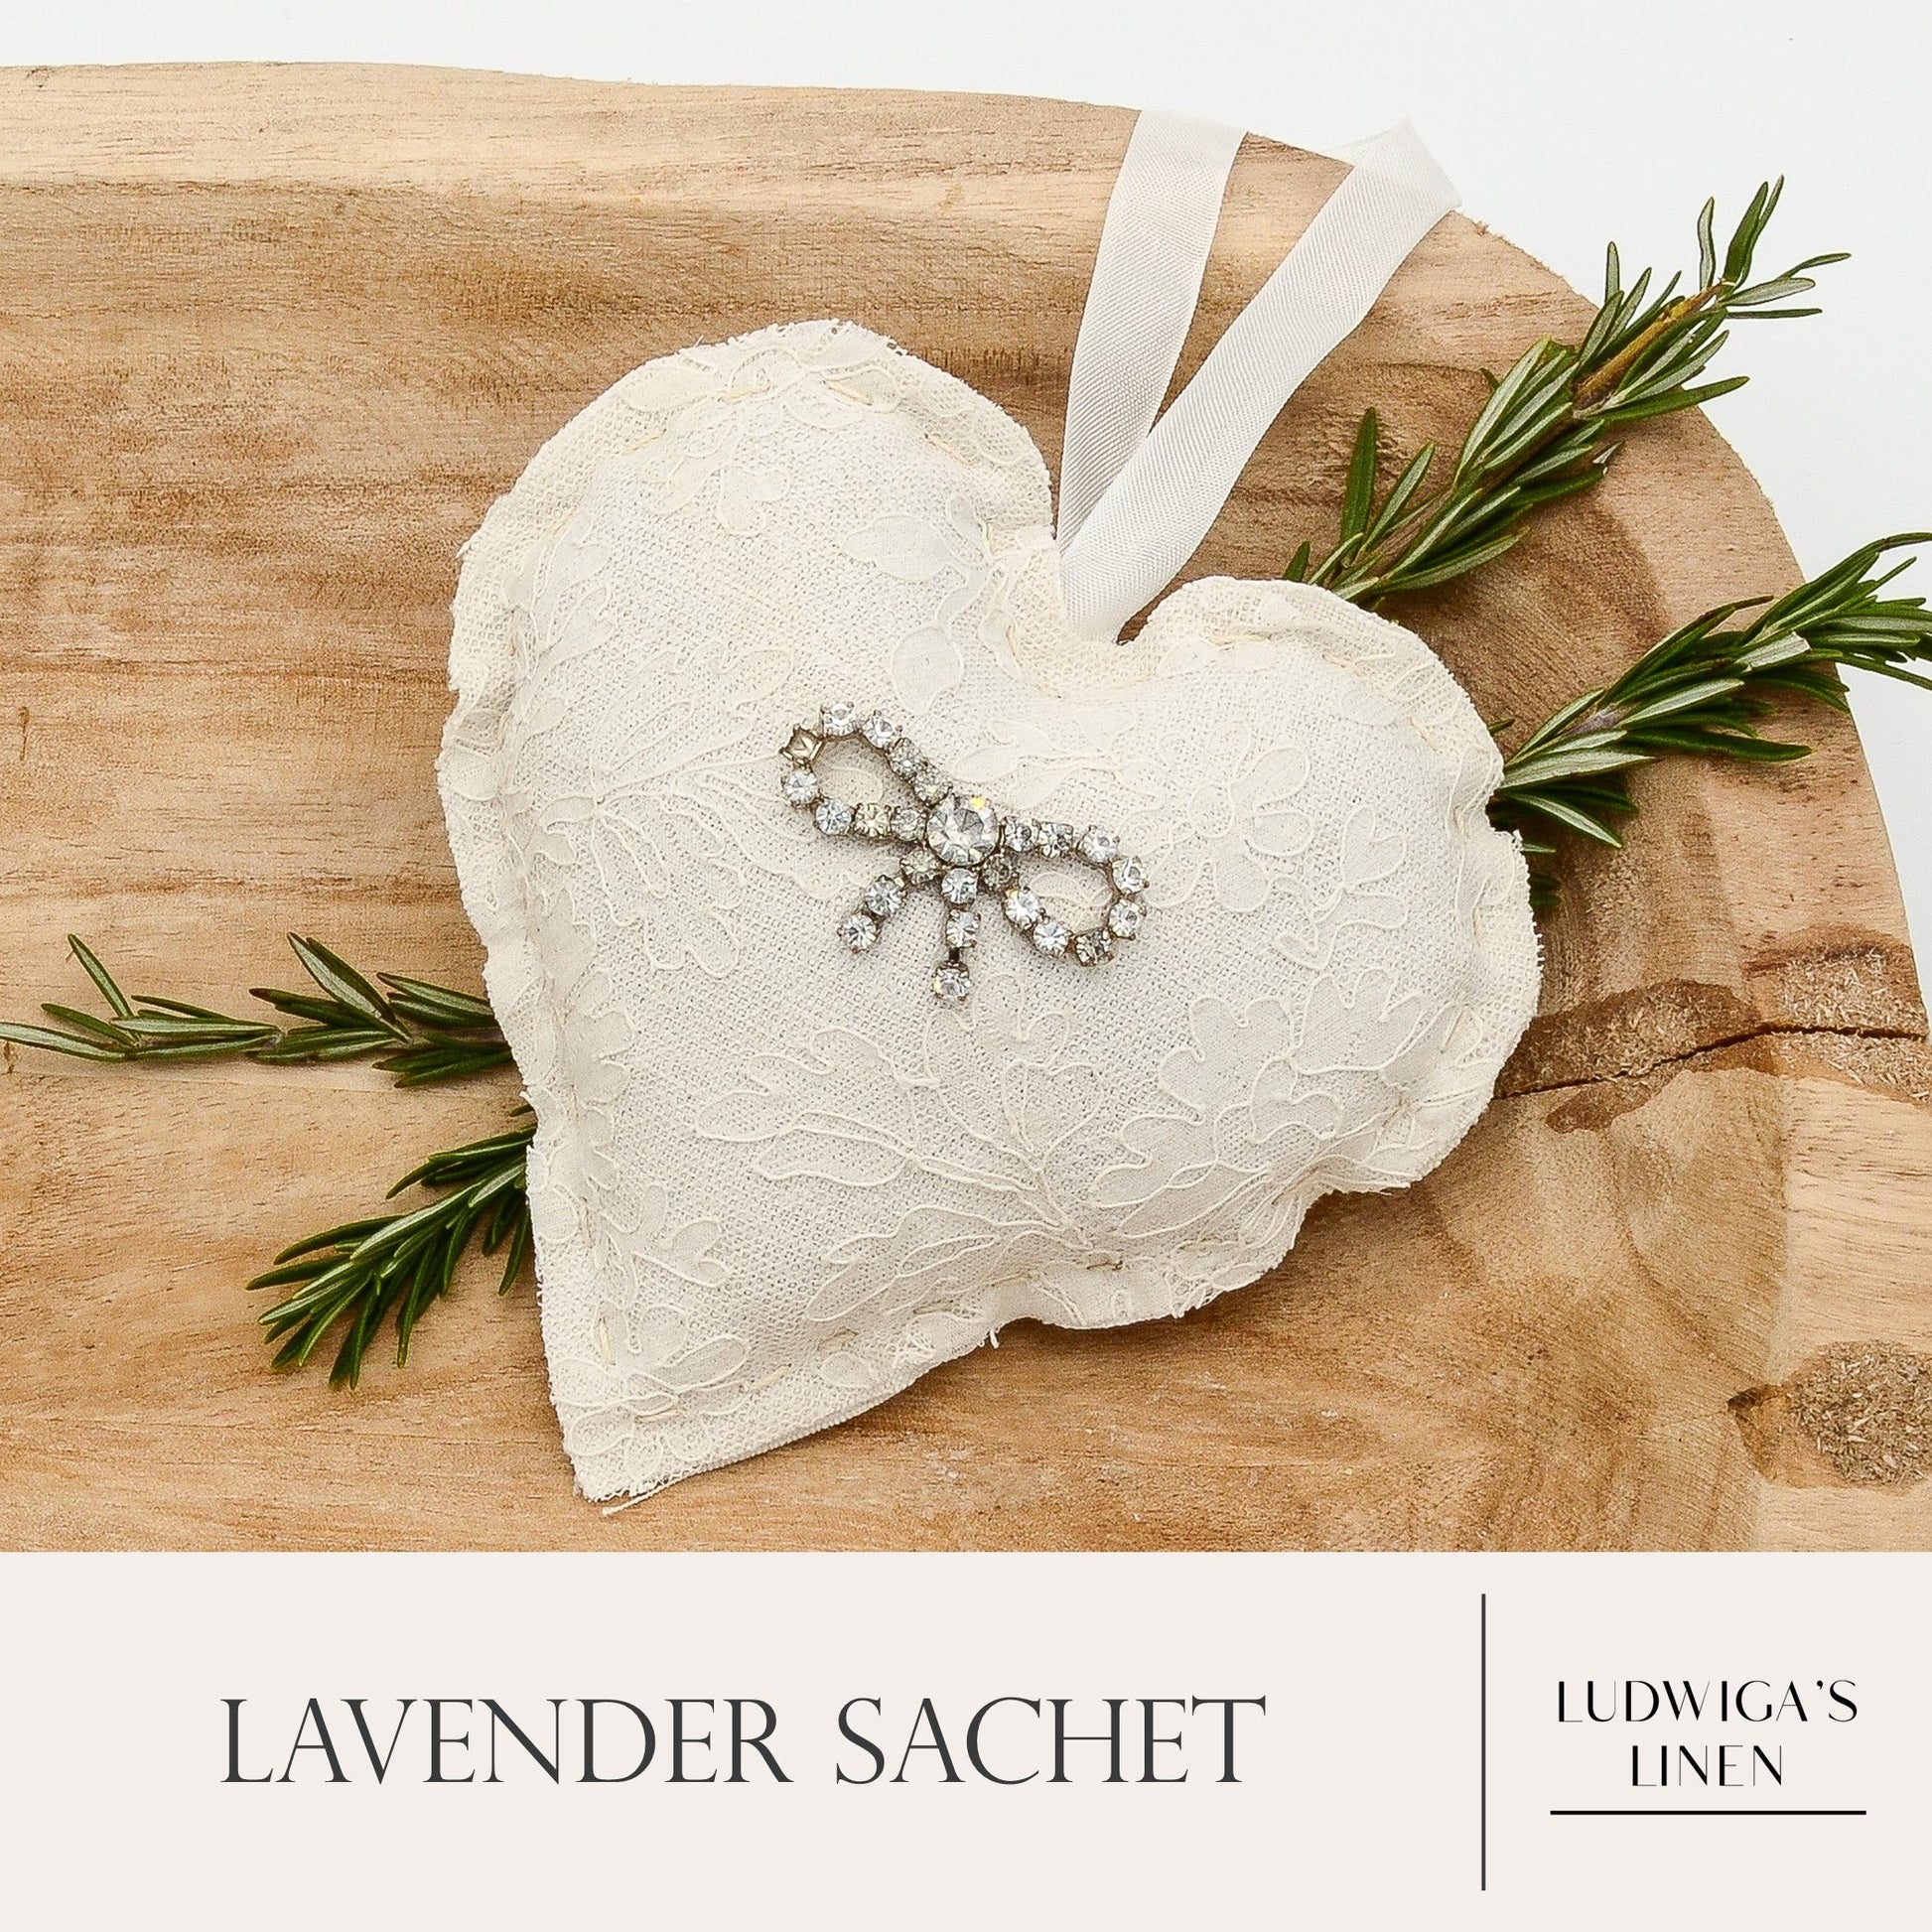 Lavender sachet heart made from antique/vintage lace, antique European white linen, vintage jewelry piece and ribbon tie, and filled with high quality lavender from Provence France